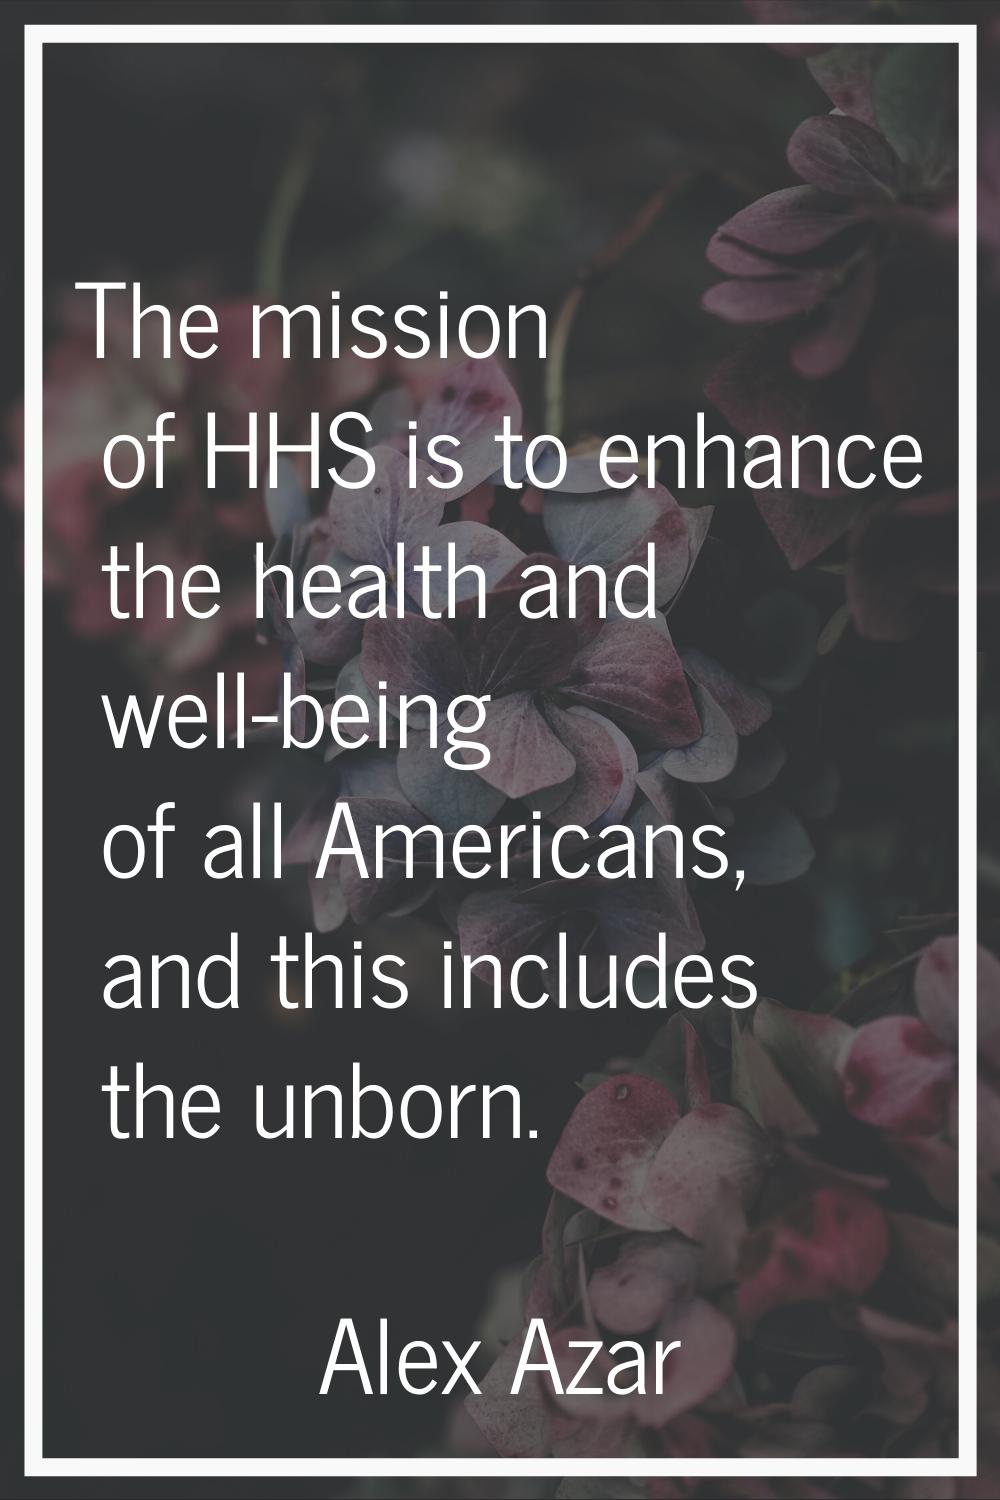 The mission of HHS is to enhance the health and well-being of all Americans, and this includes the 